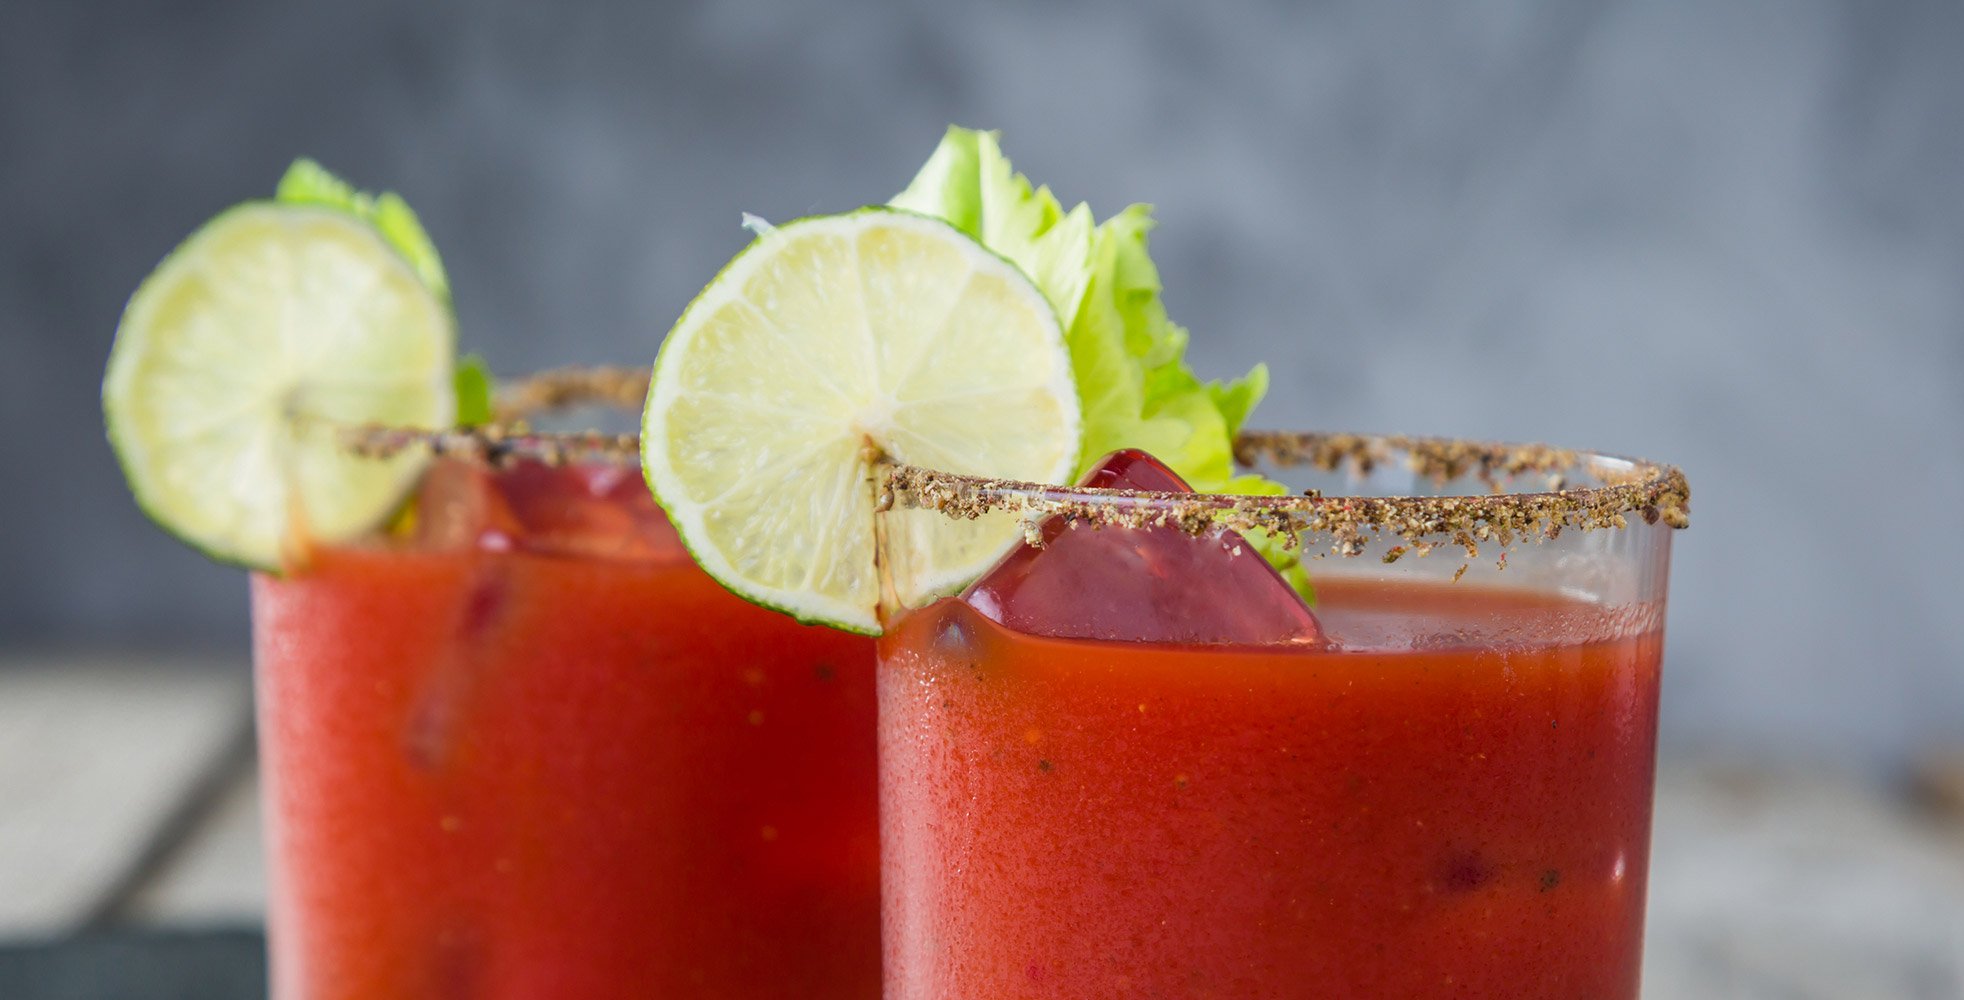 There's a new Bloody Mary mix you don’t want to miss out on heading into the holidays.